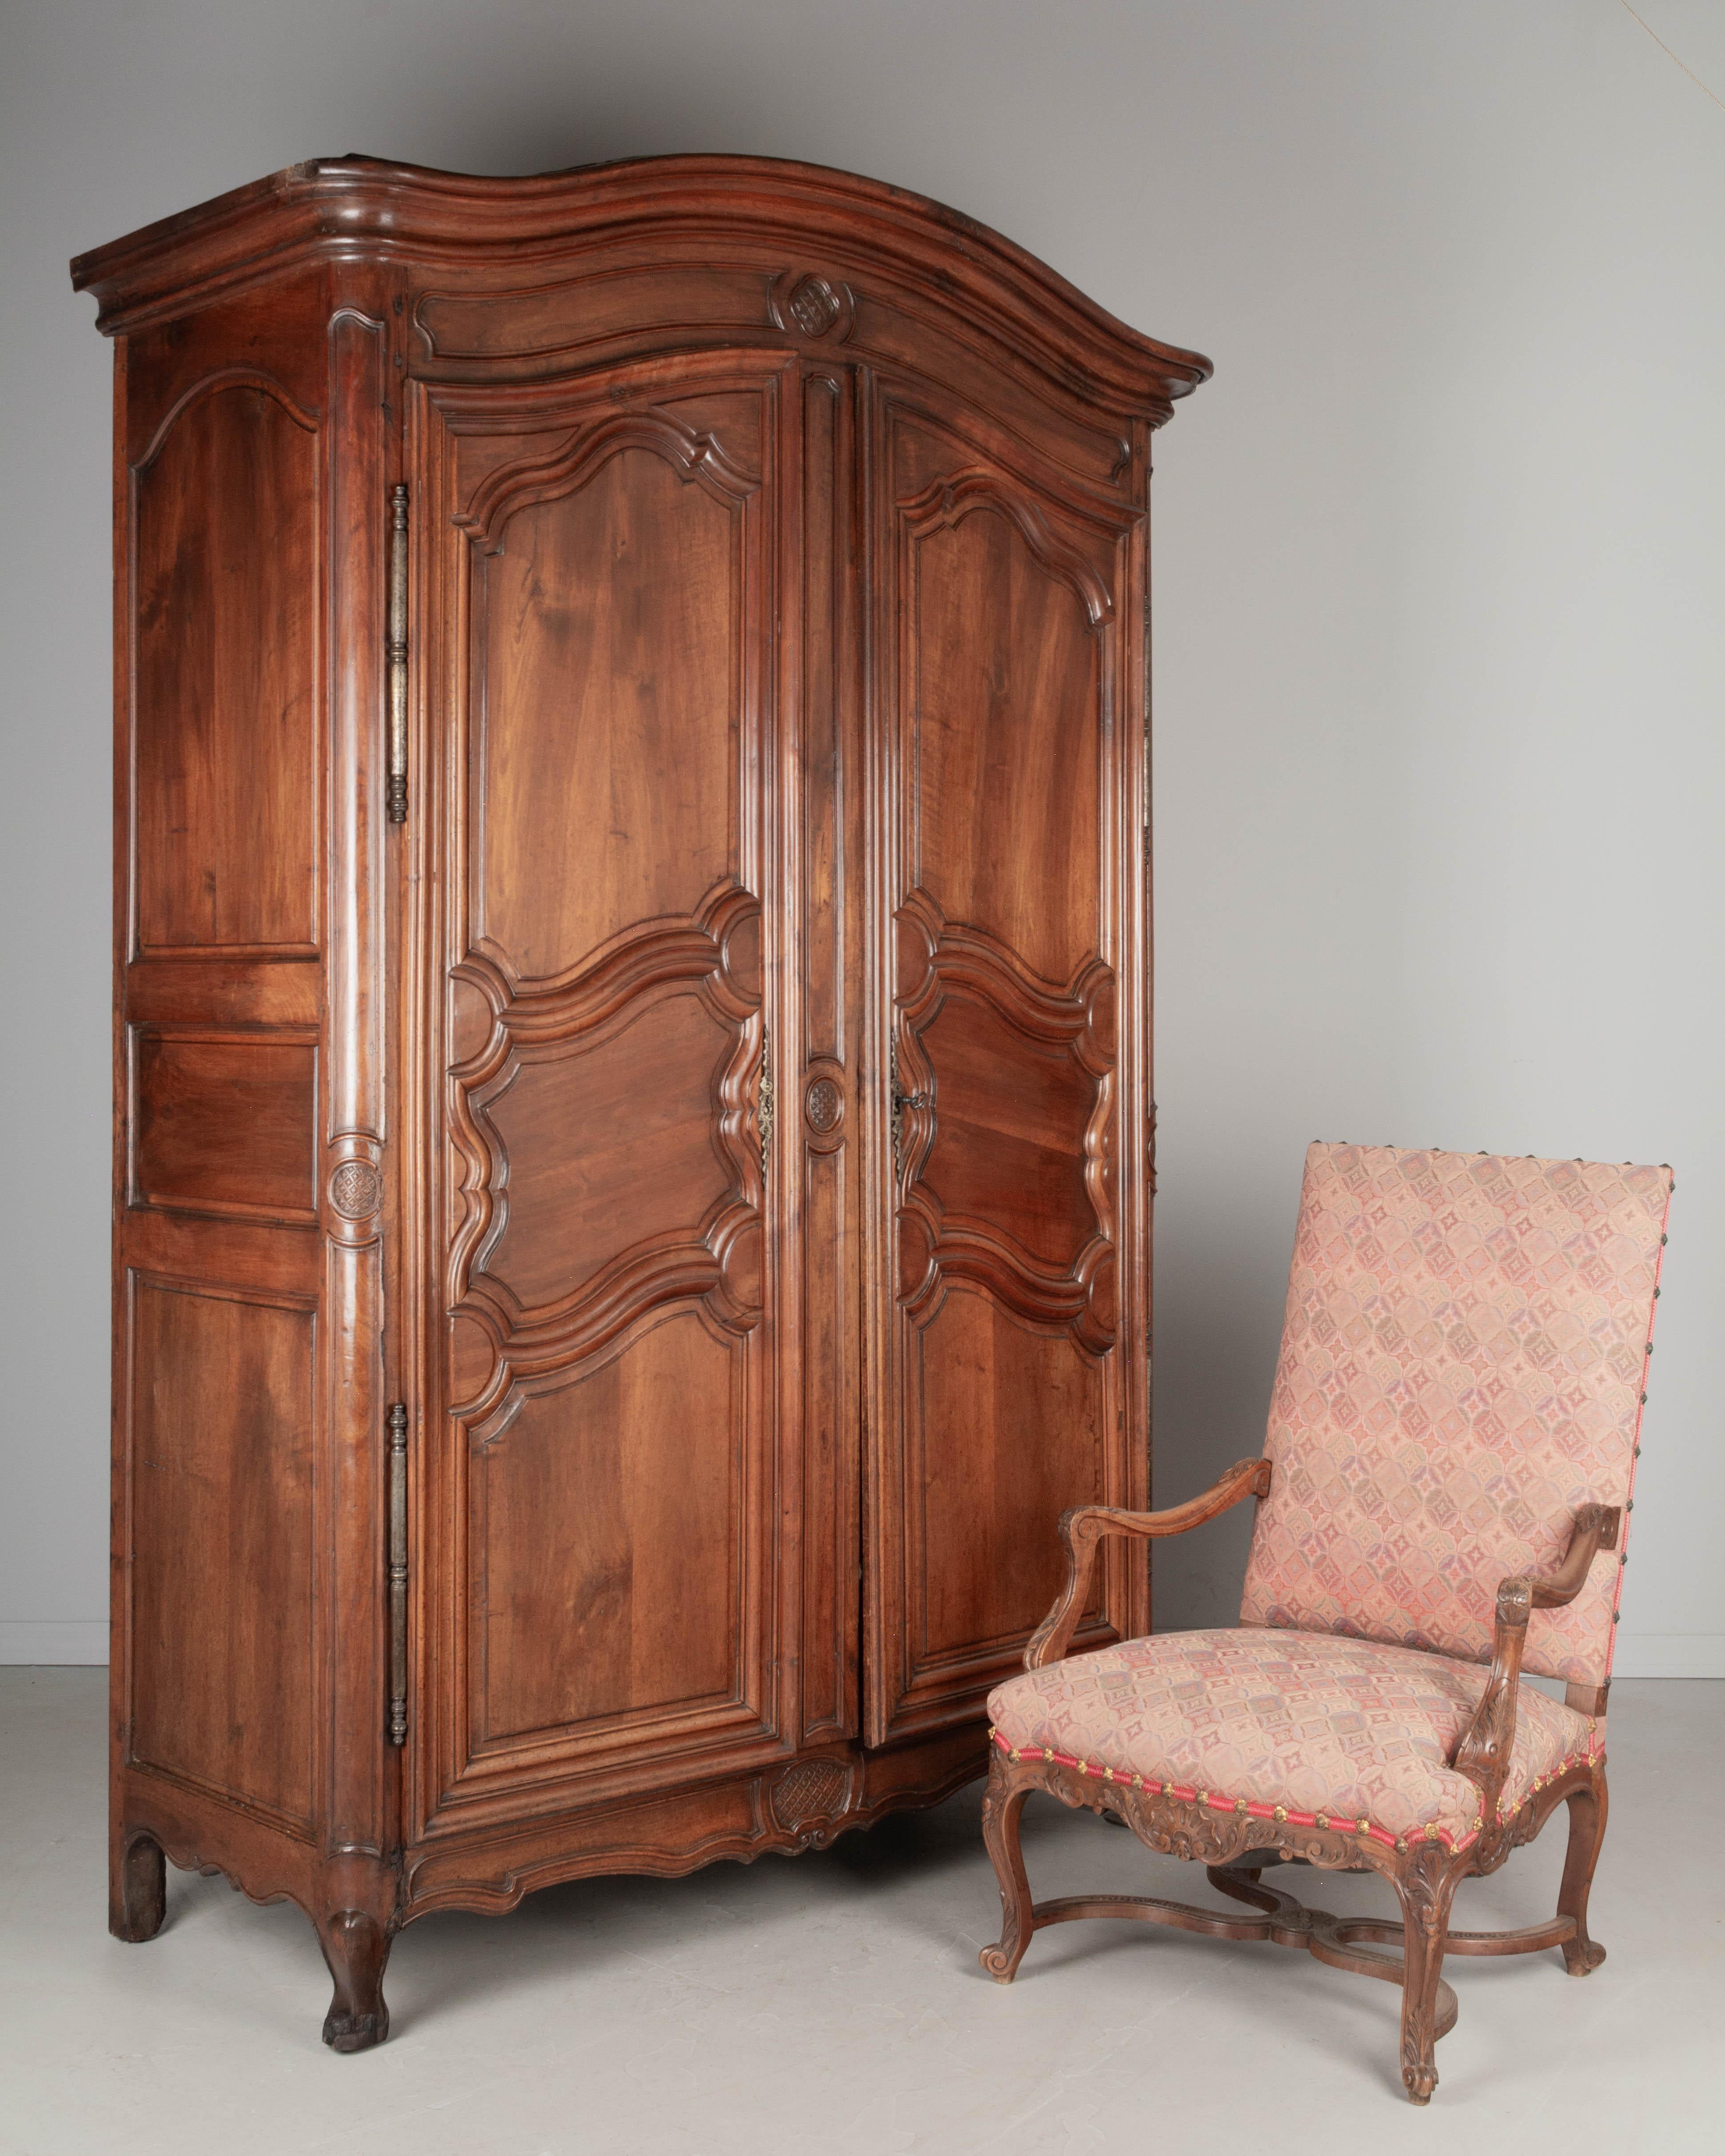 18th Century French Louis XV Walnut Armoire In Good Condition For Sale In Winter Park, FL